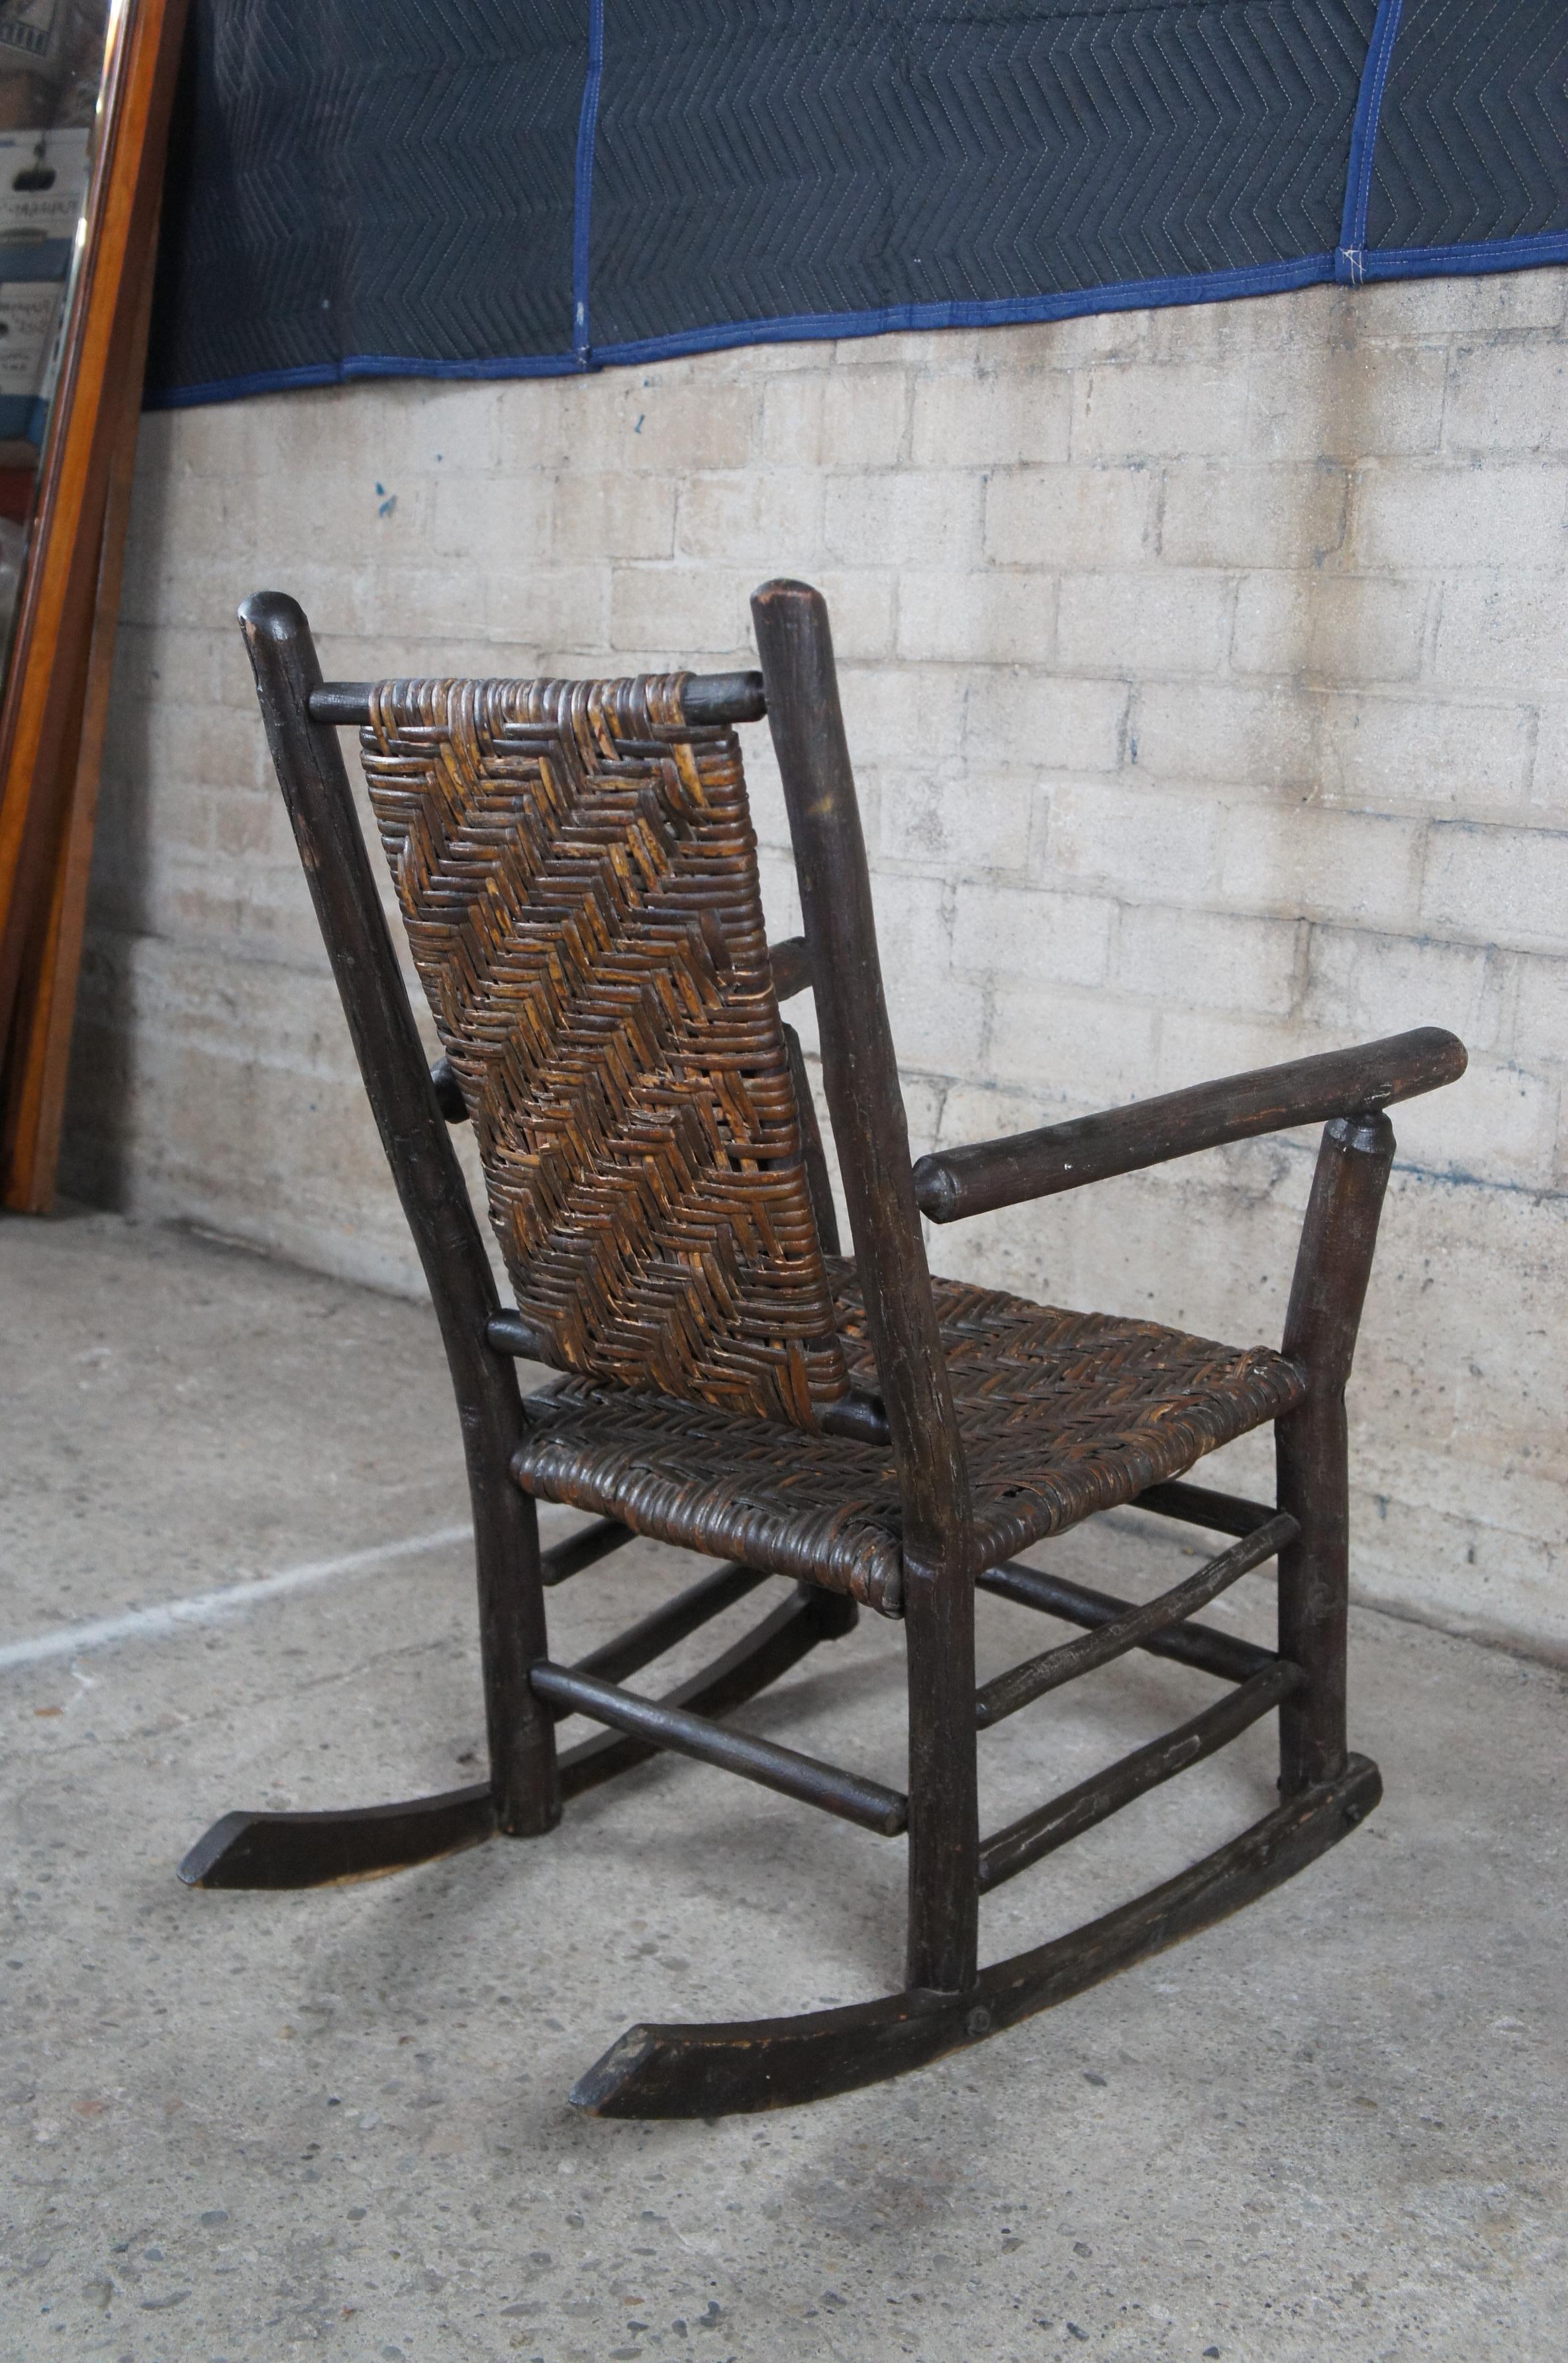 Mid-20th Century Antique Old Hickory Furniture Rocking Arm Chair No. 21 Rocker Adirondack Lodge For Sale